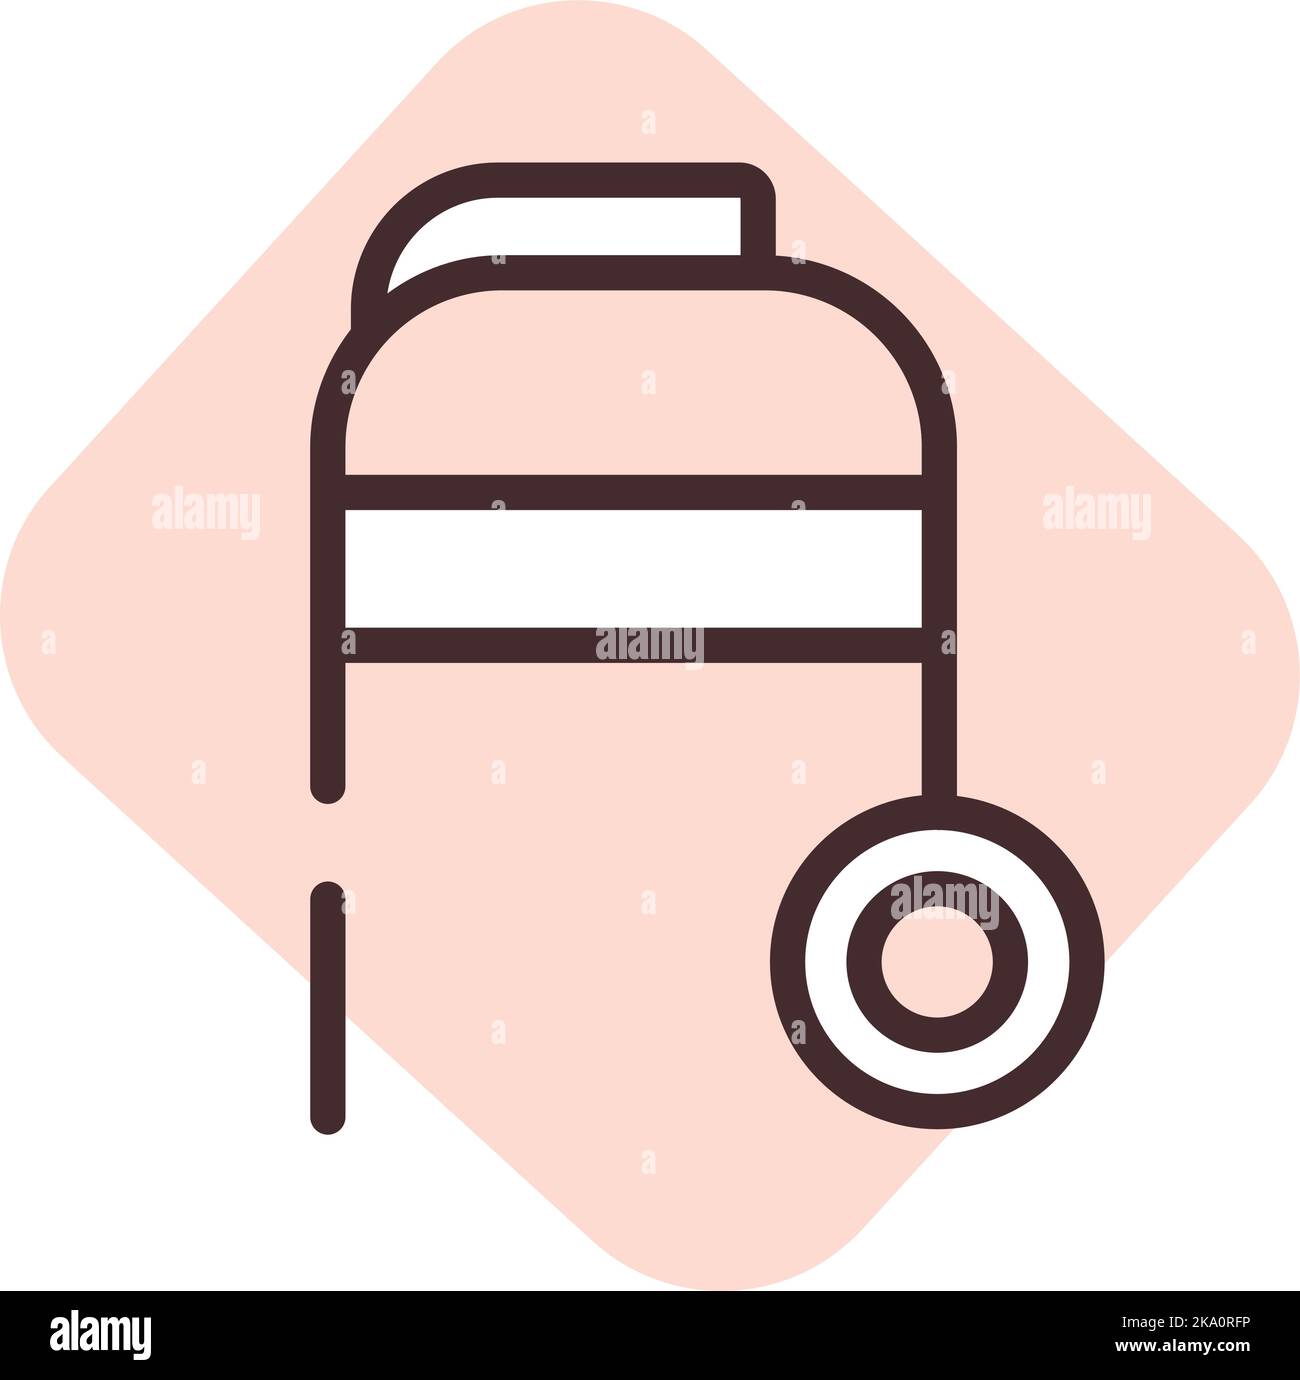 Walker aid, illustration or icon, vector on white background. Stock Vector